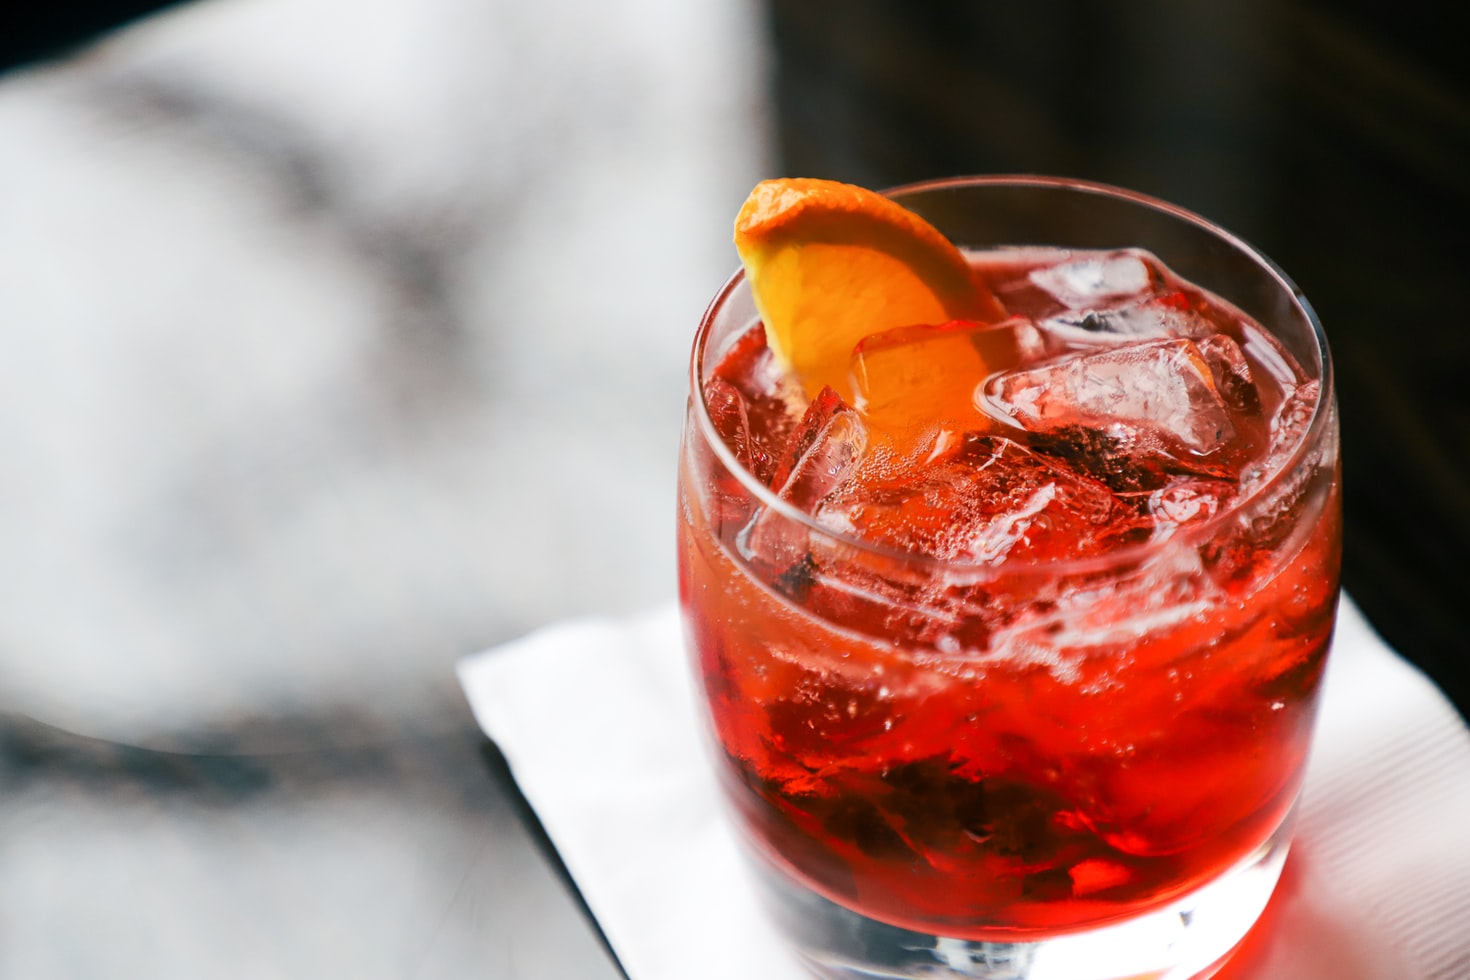 How to Make a Non-Alcoholic Negroni Cocktail